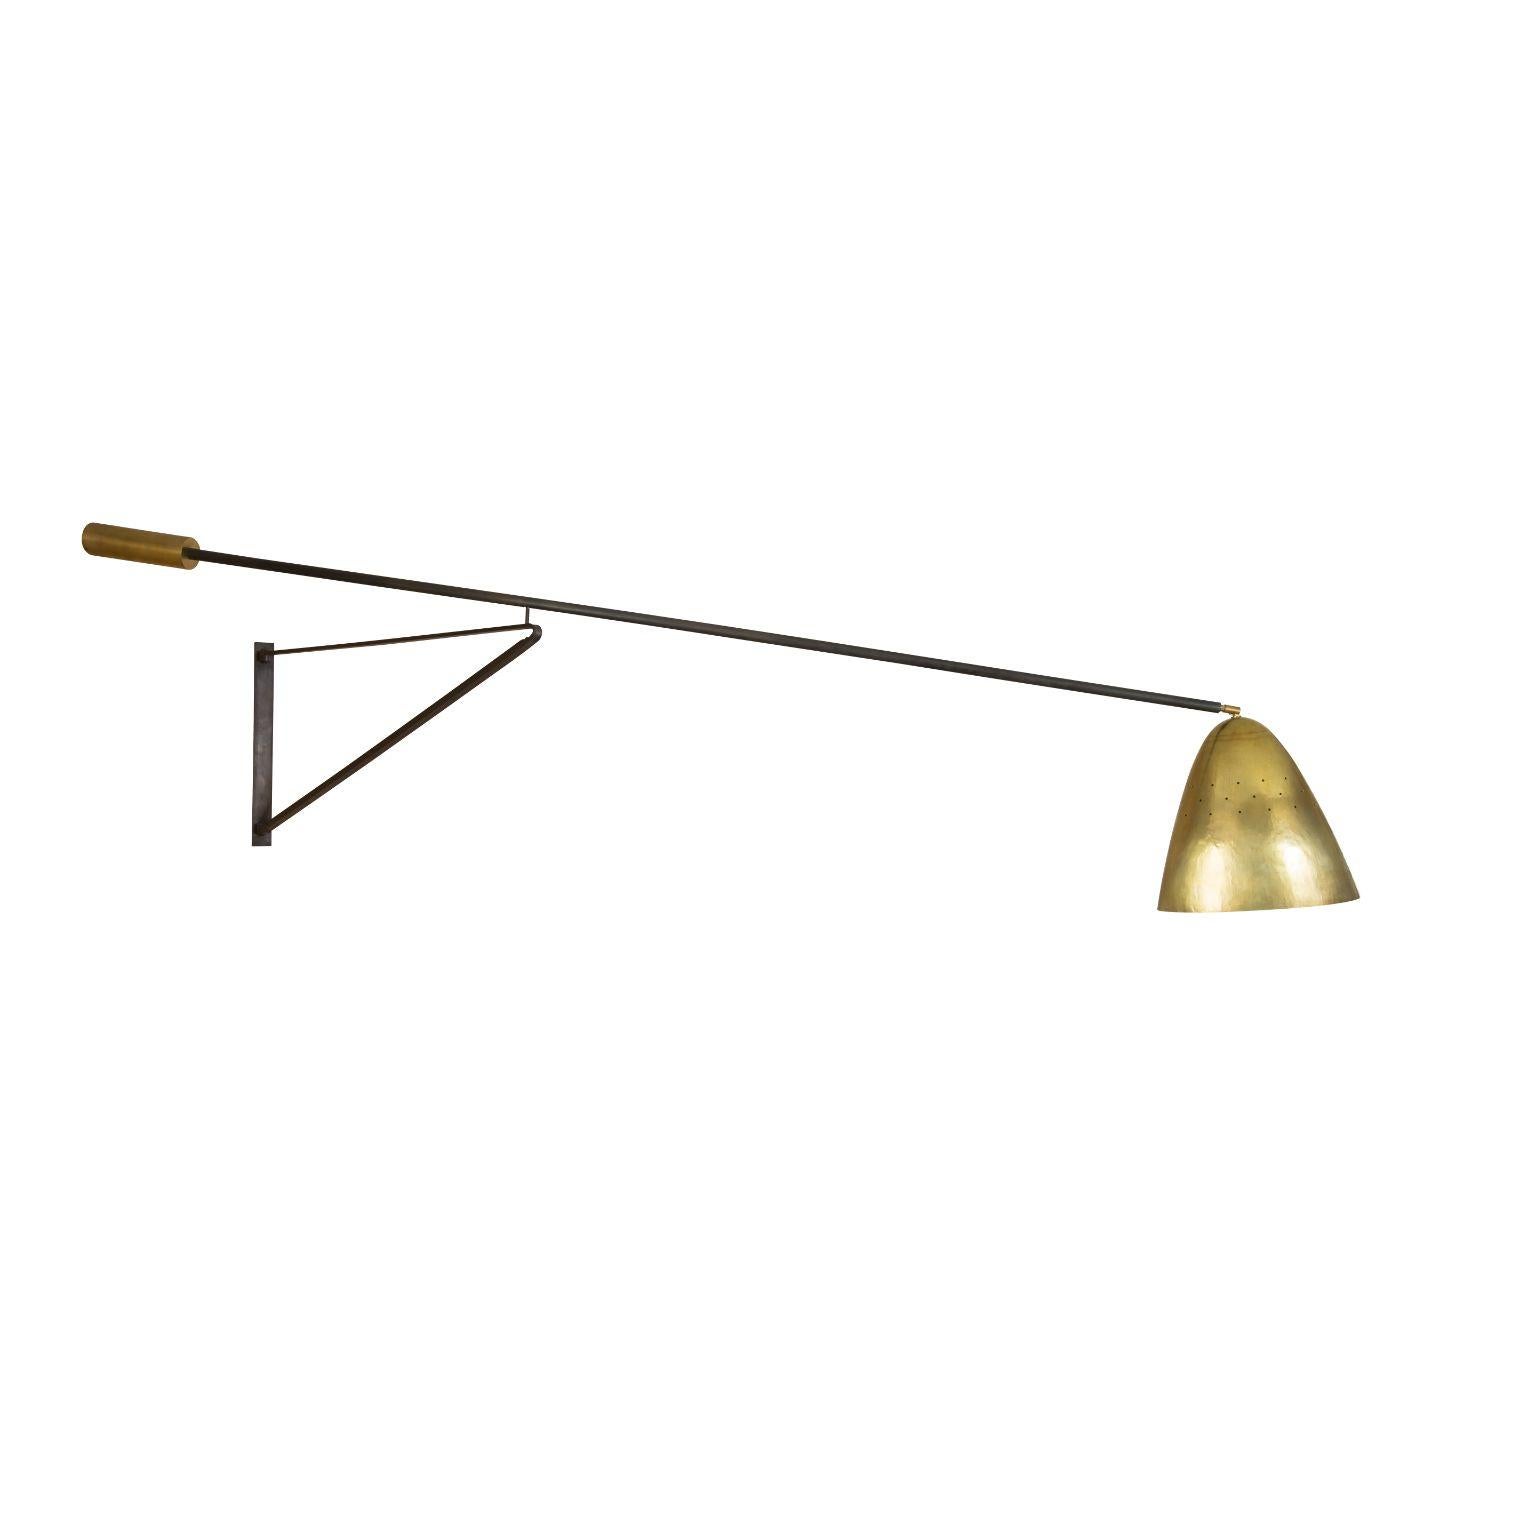 Demeter ceiling lamp by Emilie Lemardeley
Dimensions: D 245 x W 30 x H 55 cm
Materials: Brass and steel
Weight: 10 kg
Also Available in different dimensions.

The Demeter lighting refers to the nutritive earth goodess. This goddness told to